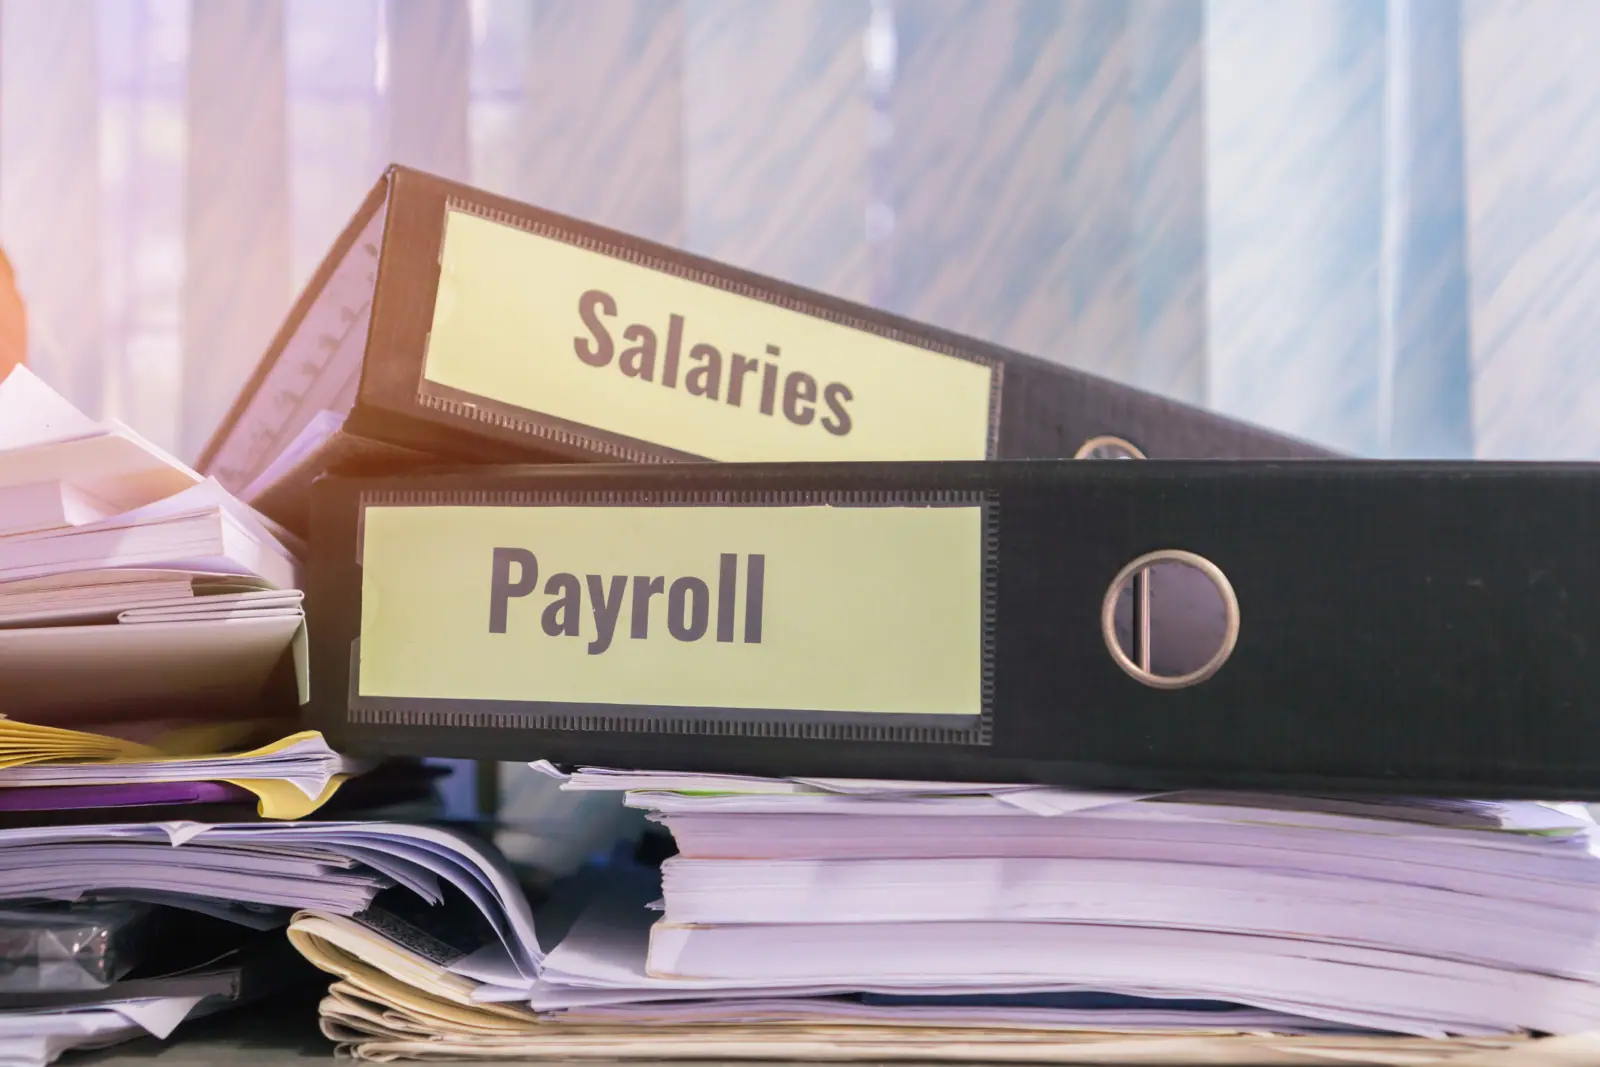 Choose a payroll technology that allows you to easily access and gain insights from your data.